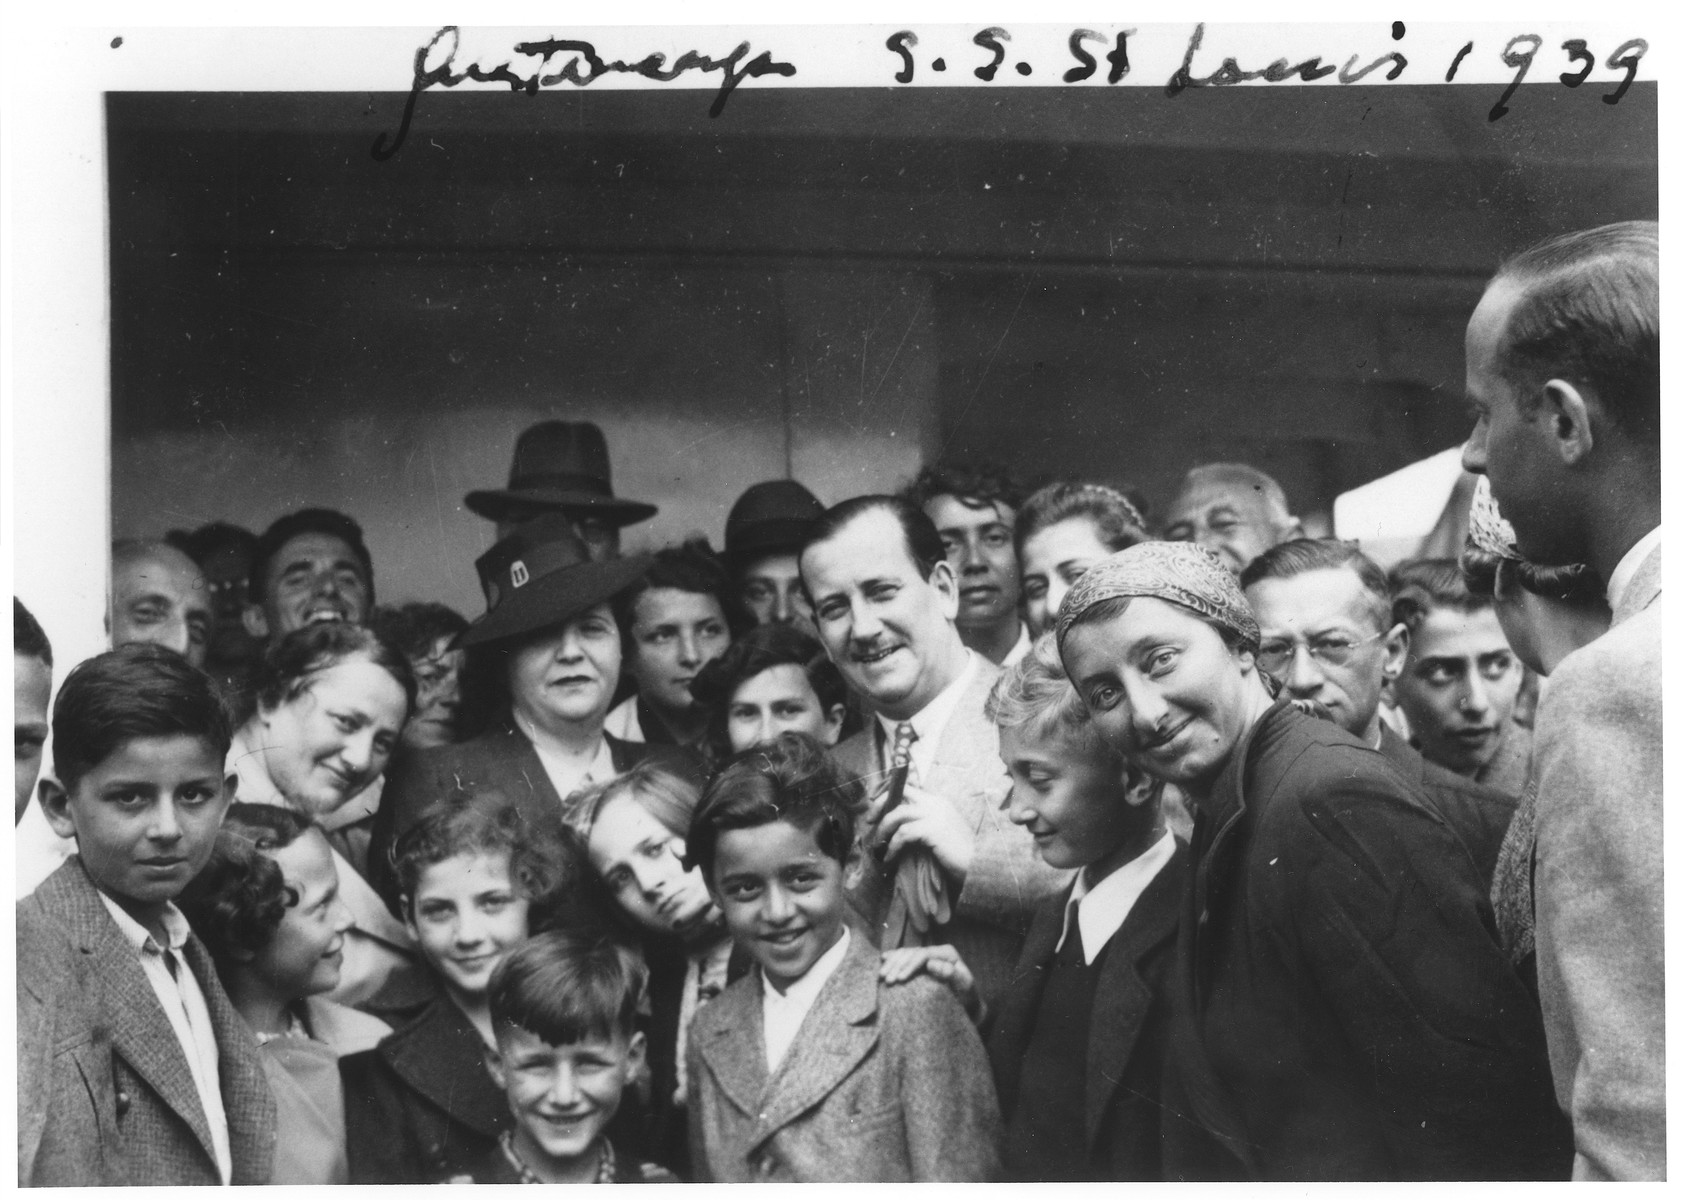 Mr. and Mrs. Morris Troper (center) pose with Jewish refugees on the deck of the MS St. Louis in the port of Antwerp.  

Also pictured are Liesel Joseph, Ruth Karliner, Heinz Gallant and Windmueller.